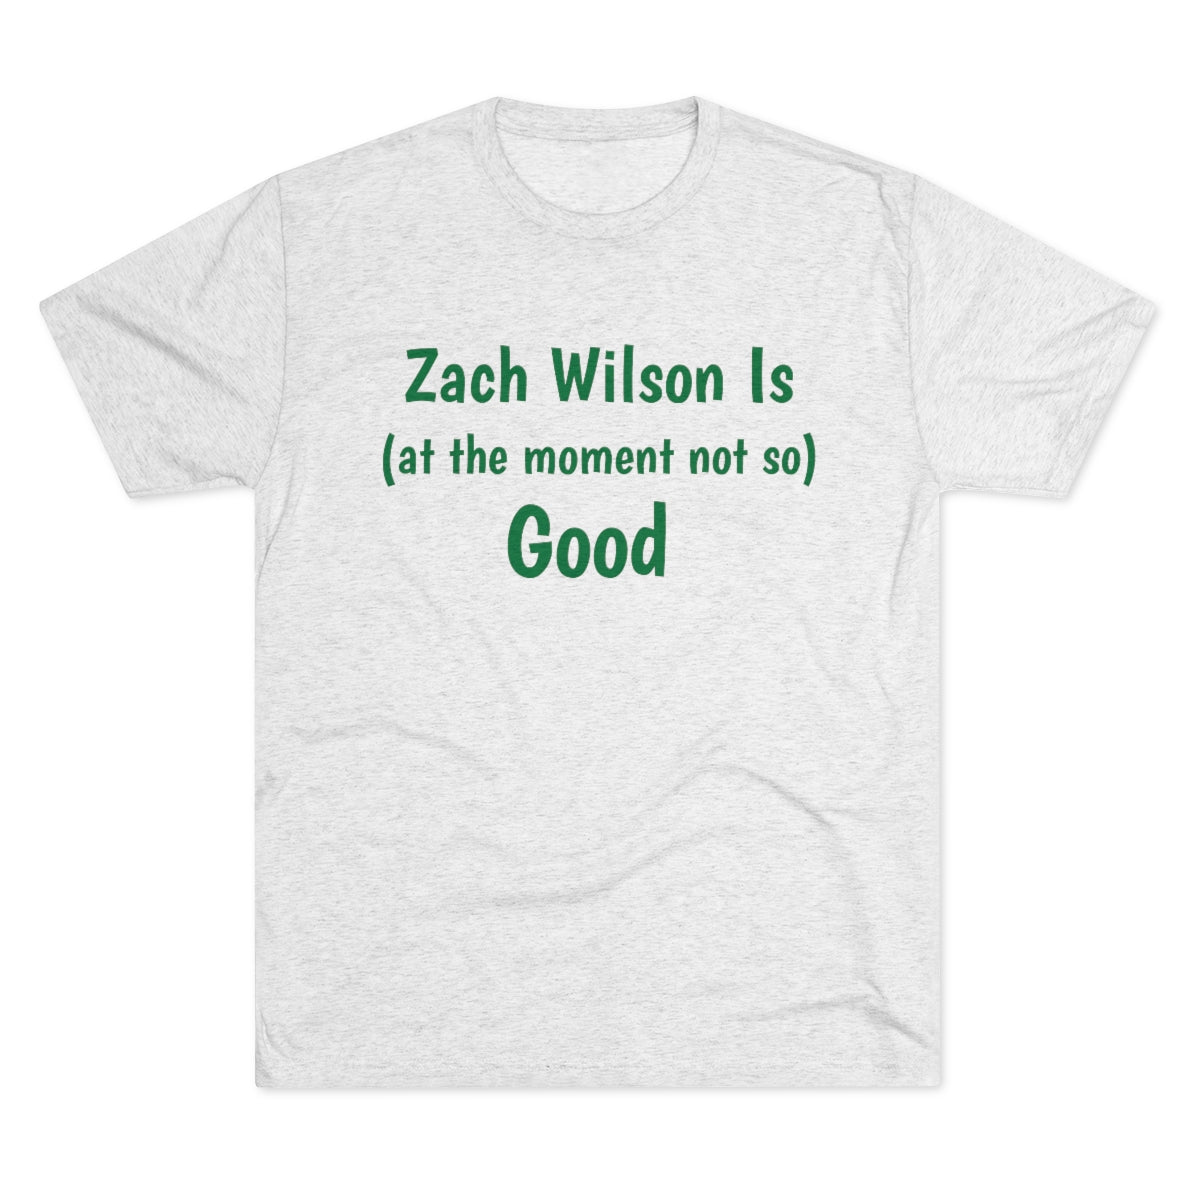 Zach Wilson Is (at the moment not so) Good Shirt - IsGoodBrand